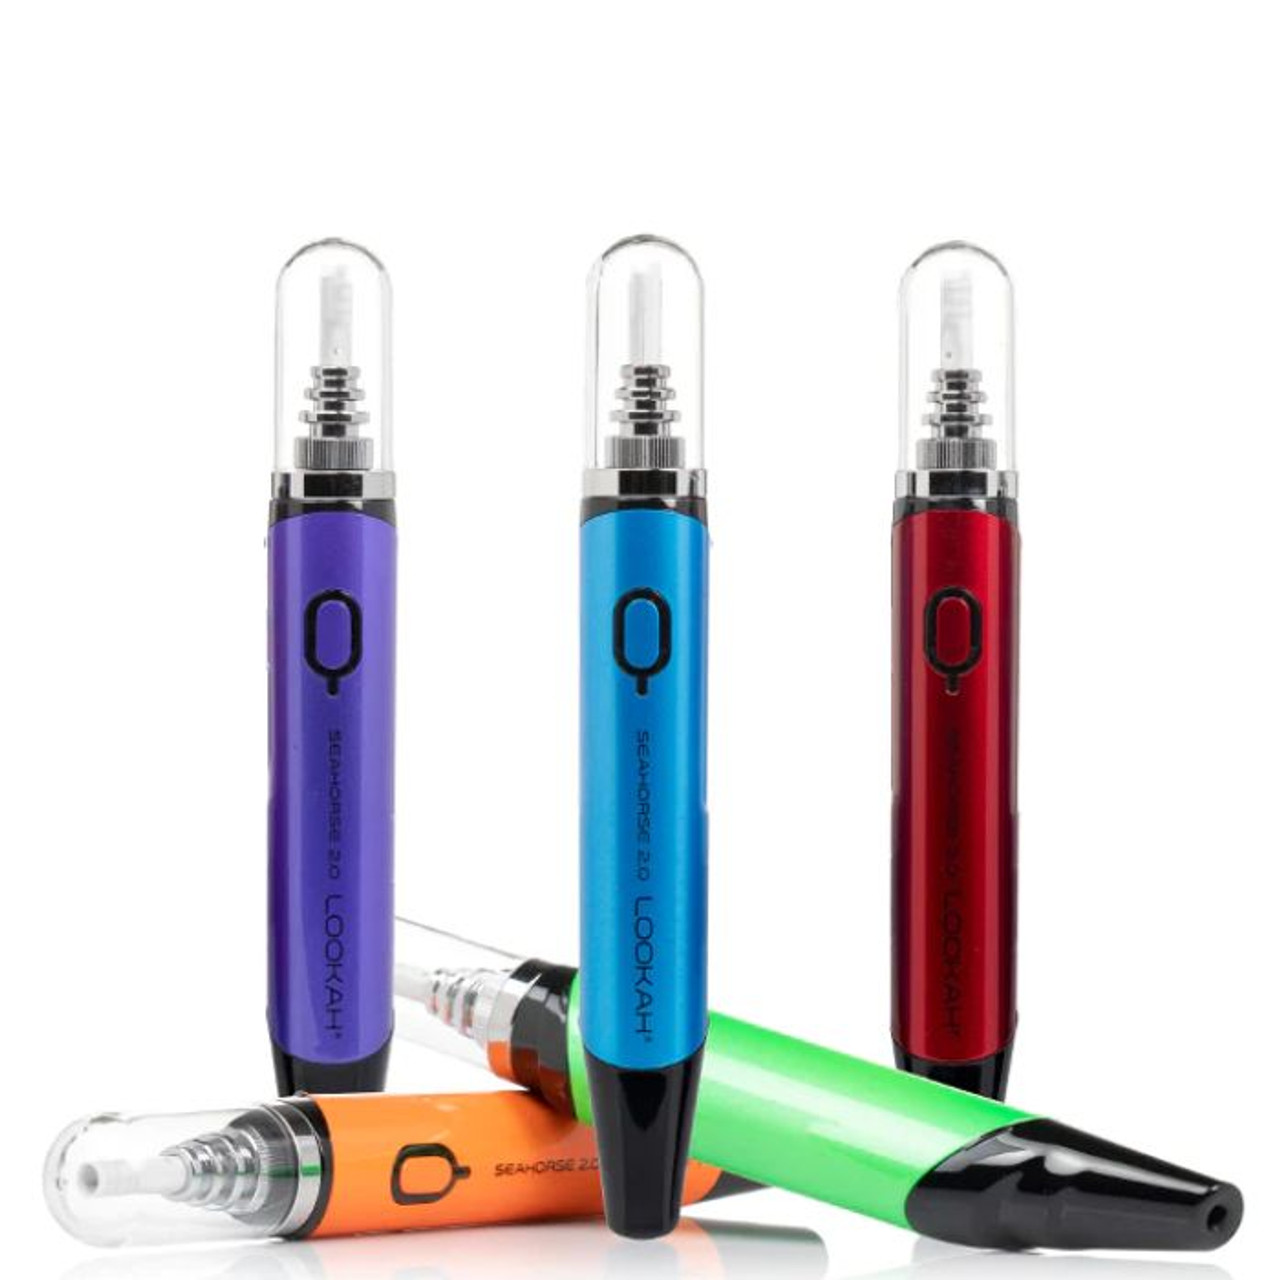 Seahorse Pro Electric Nectar Collector Kit/Dip Concentrate Pen